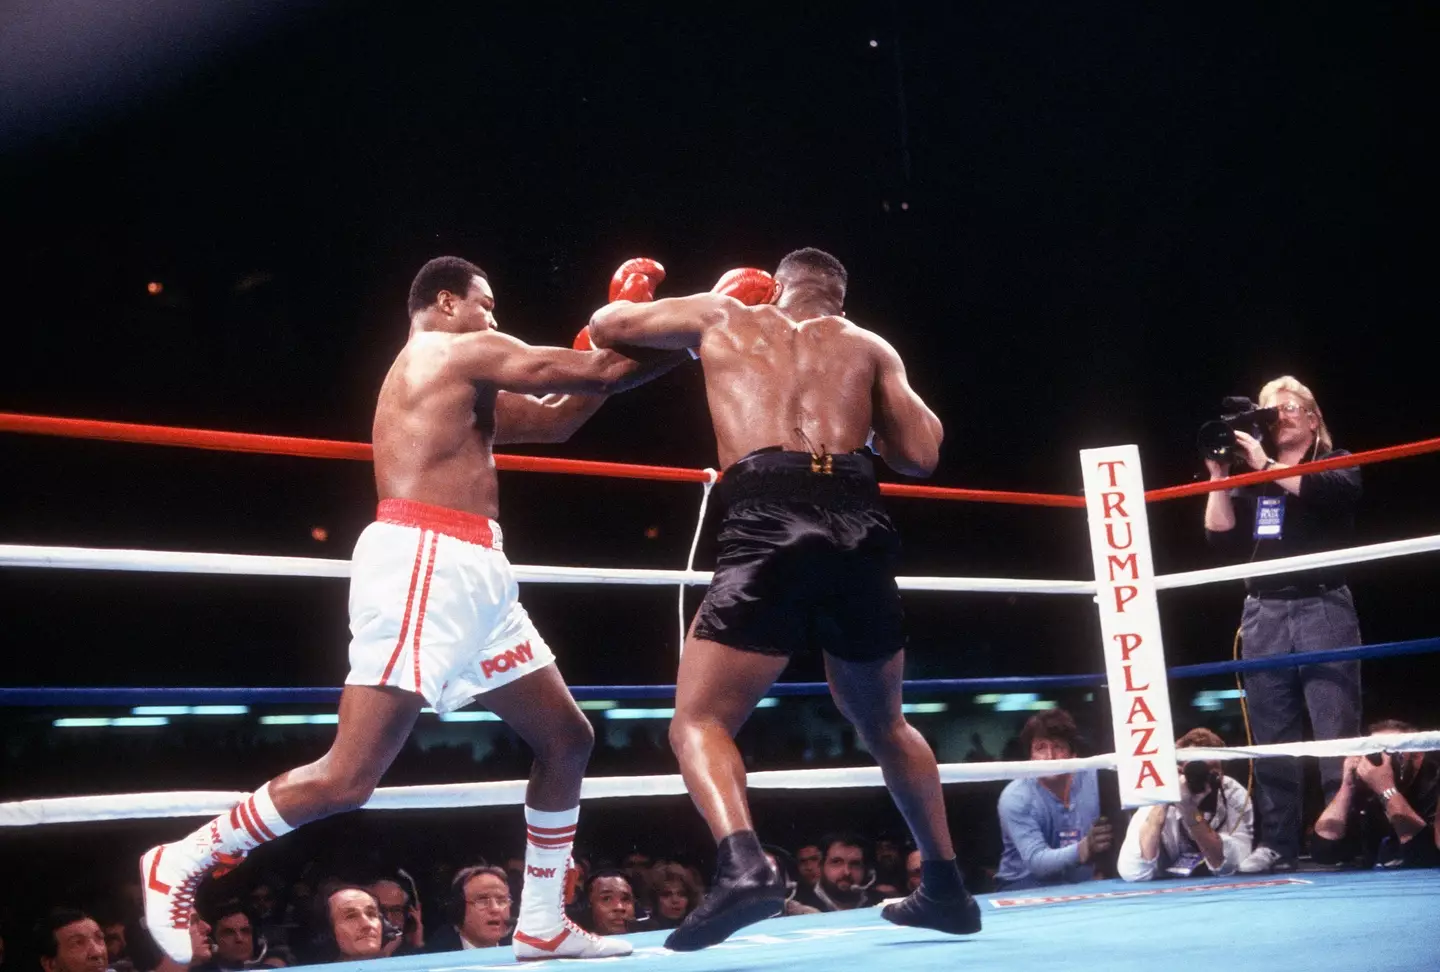 Larry Holmes and Mike Tyson fights for the WBA, WBC and IBF heavyweight tittle on January 22, 1988. Image credit: Getty